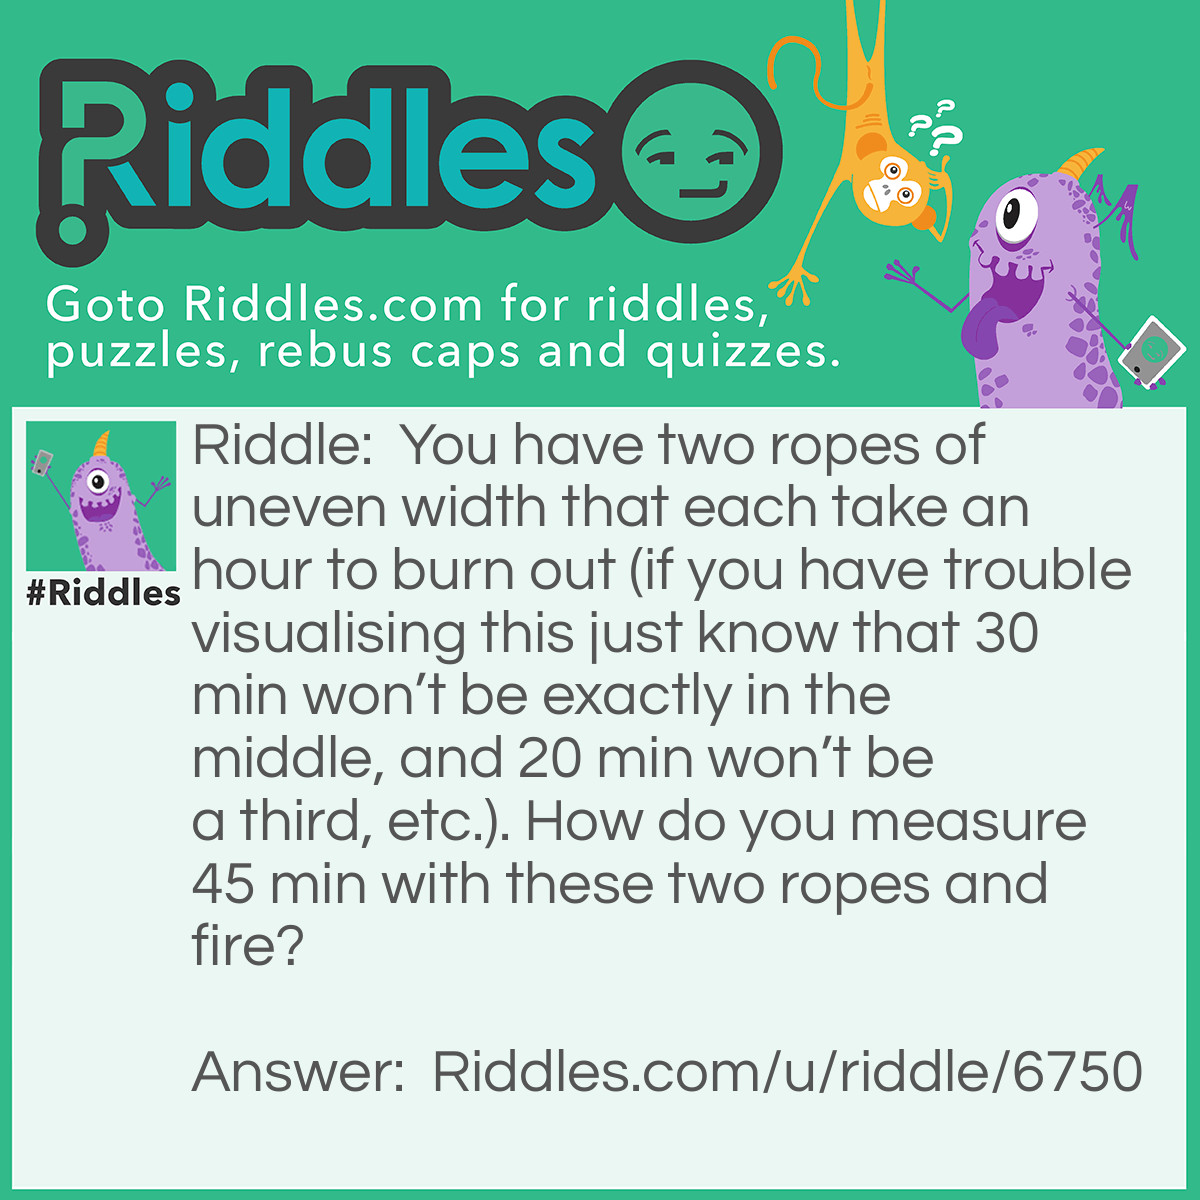 Riddle: You have two ropes of uneven width that each take an hour to burn out (if you have trouble visualising this just know that 30 min won't be exactly in the middle, and 20 min won't be a third, etc.). How do you measure 45 min with these two ropes and fire? Answer: You set fire to both ends of one rope but only one end of the other. When the first rope burns out it will have been 30min. When this happens, you set fire to the other side of the other rope. After that burns out, in 15min, it will have been 45min.